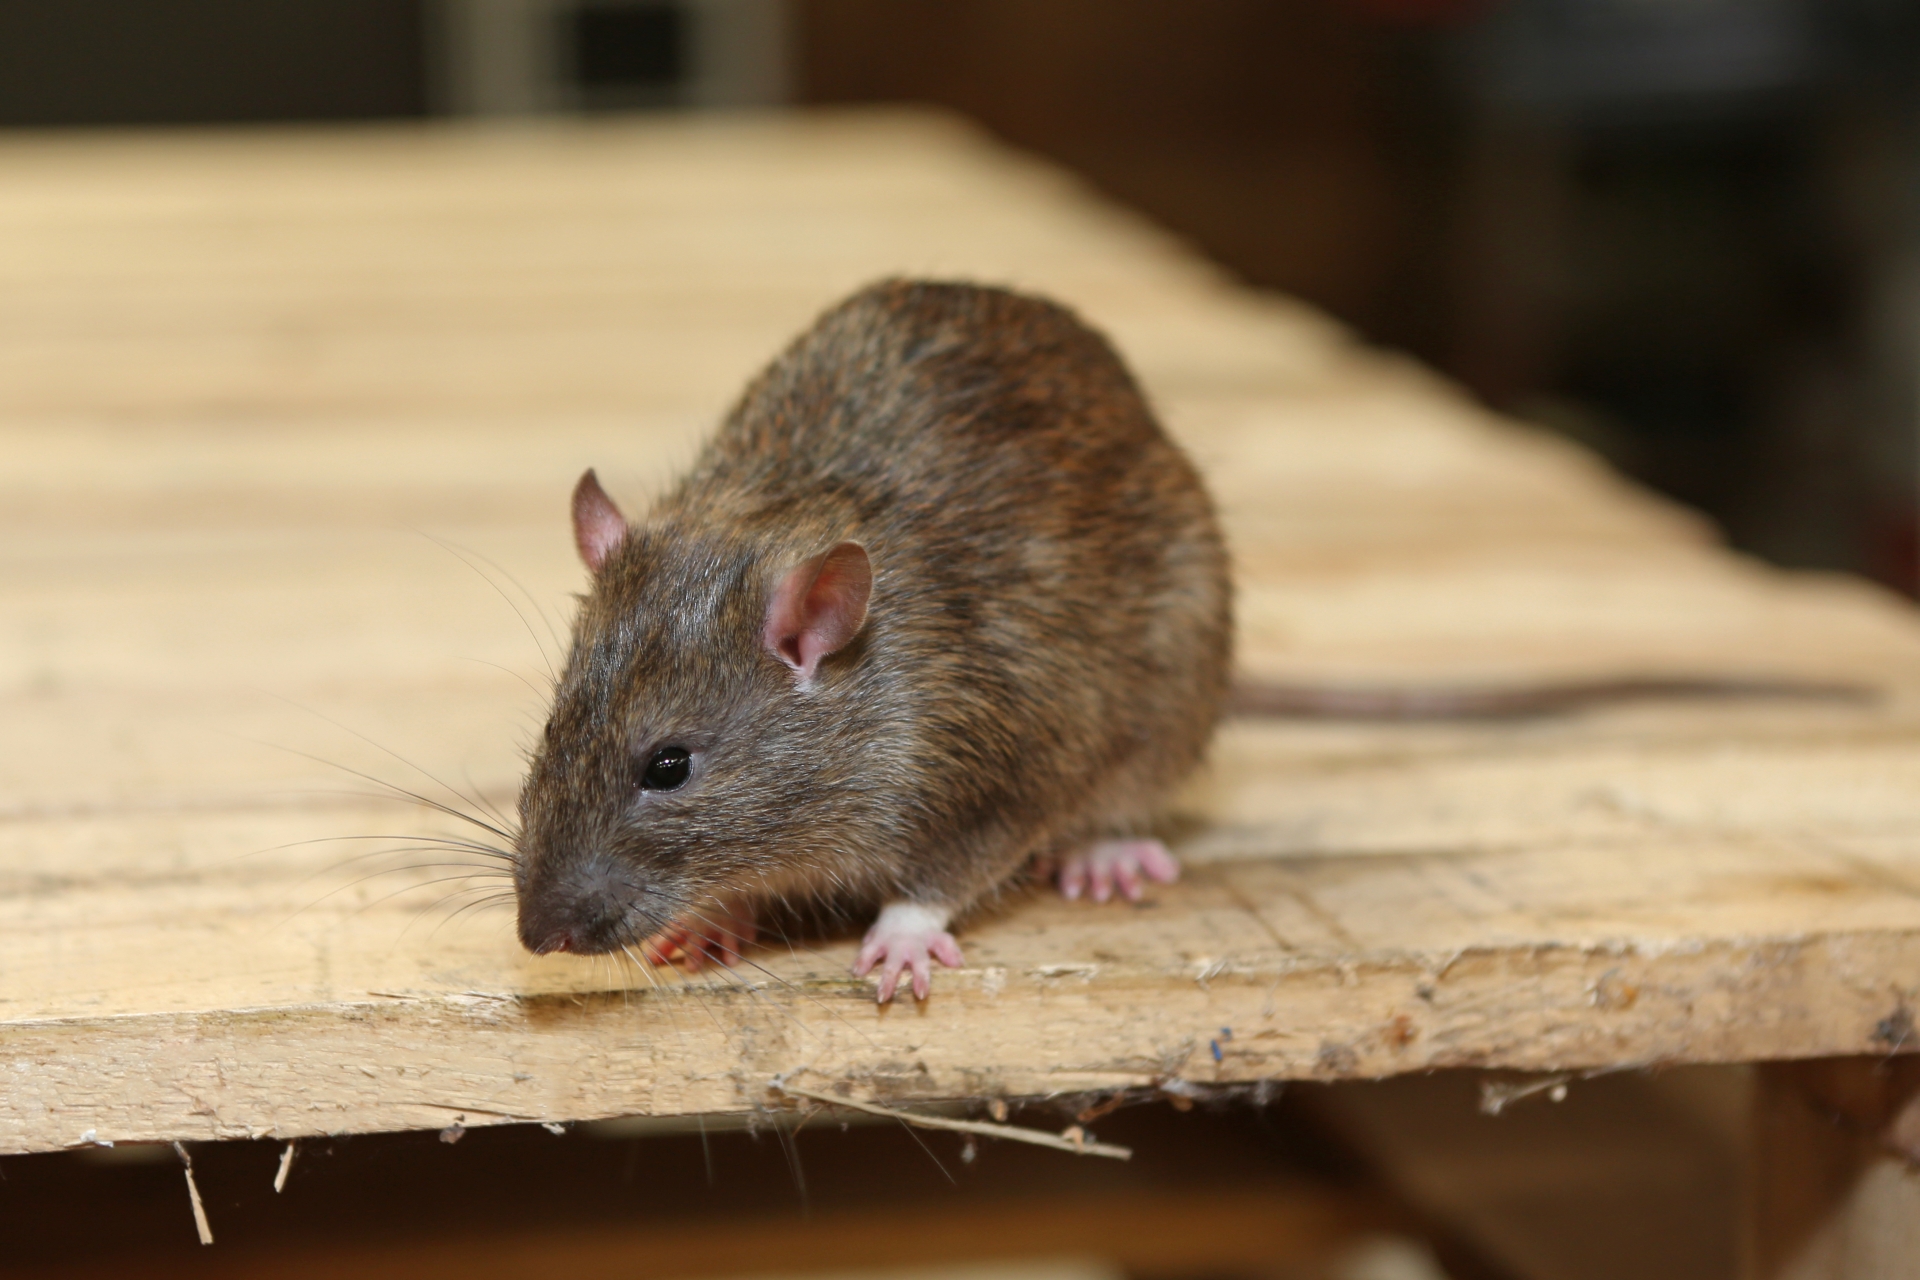 Rat Infestation, Pest Control in Brompton, SW3. Call Now 020 8166 9746